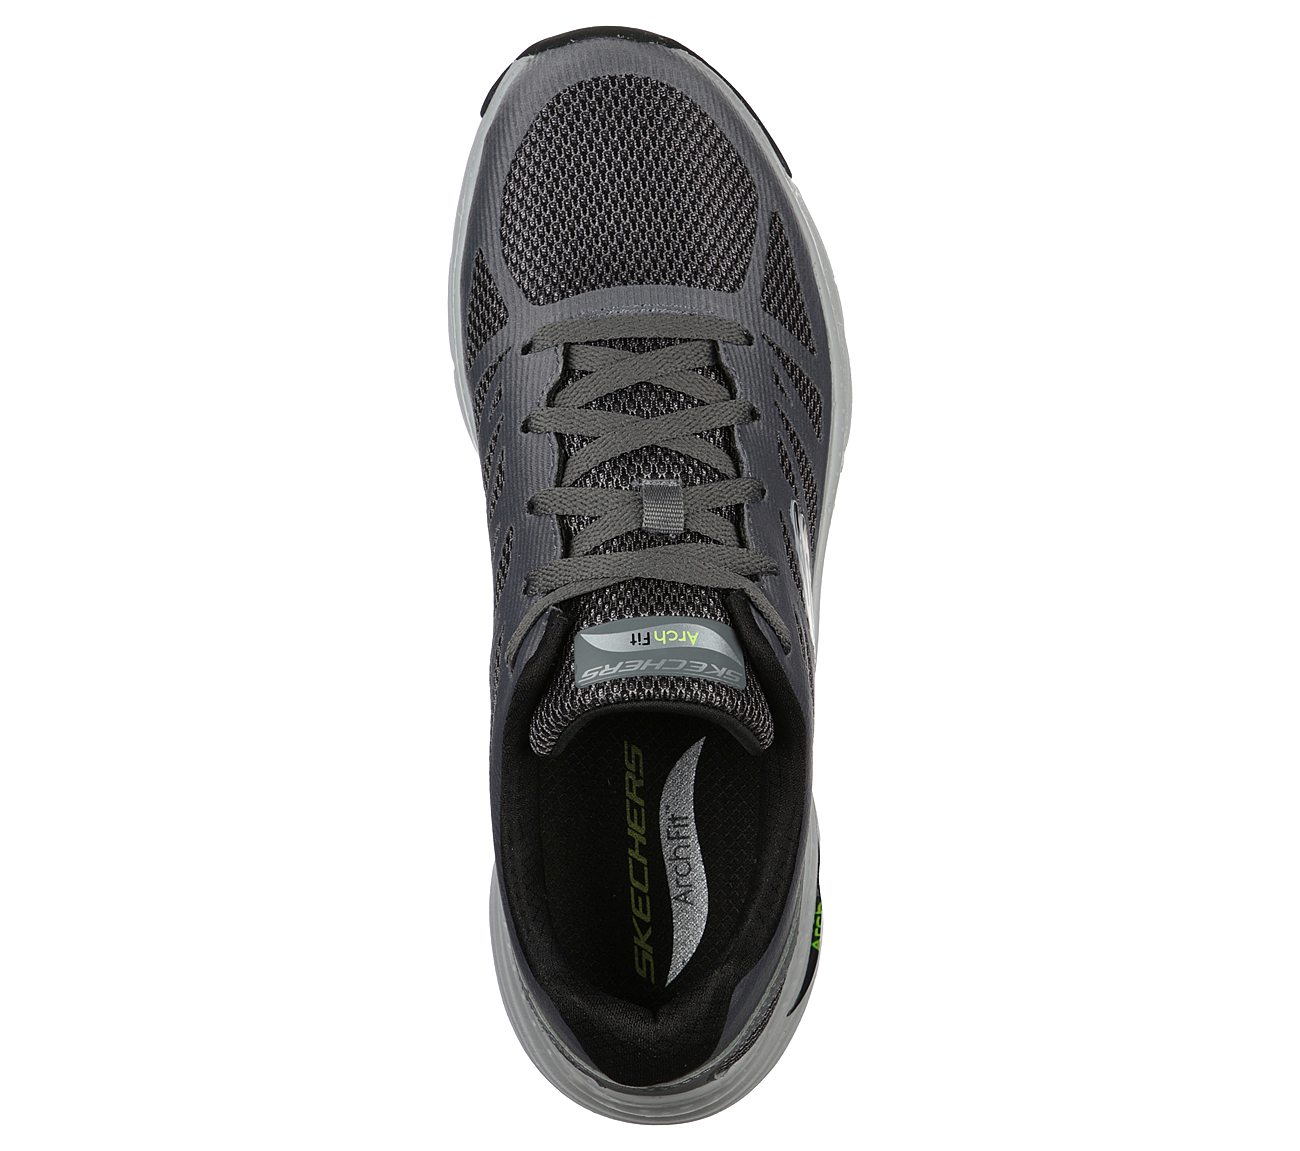 ARCH FIT - CHARGE BACK, CHARCOAL/BLACK Footwear Top View